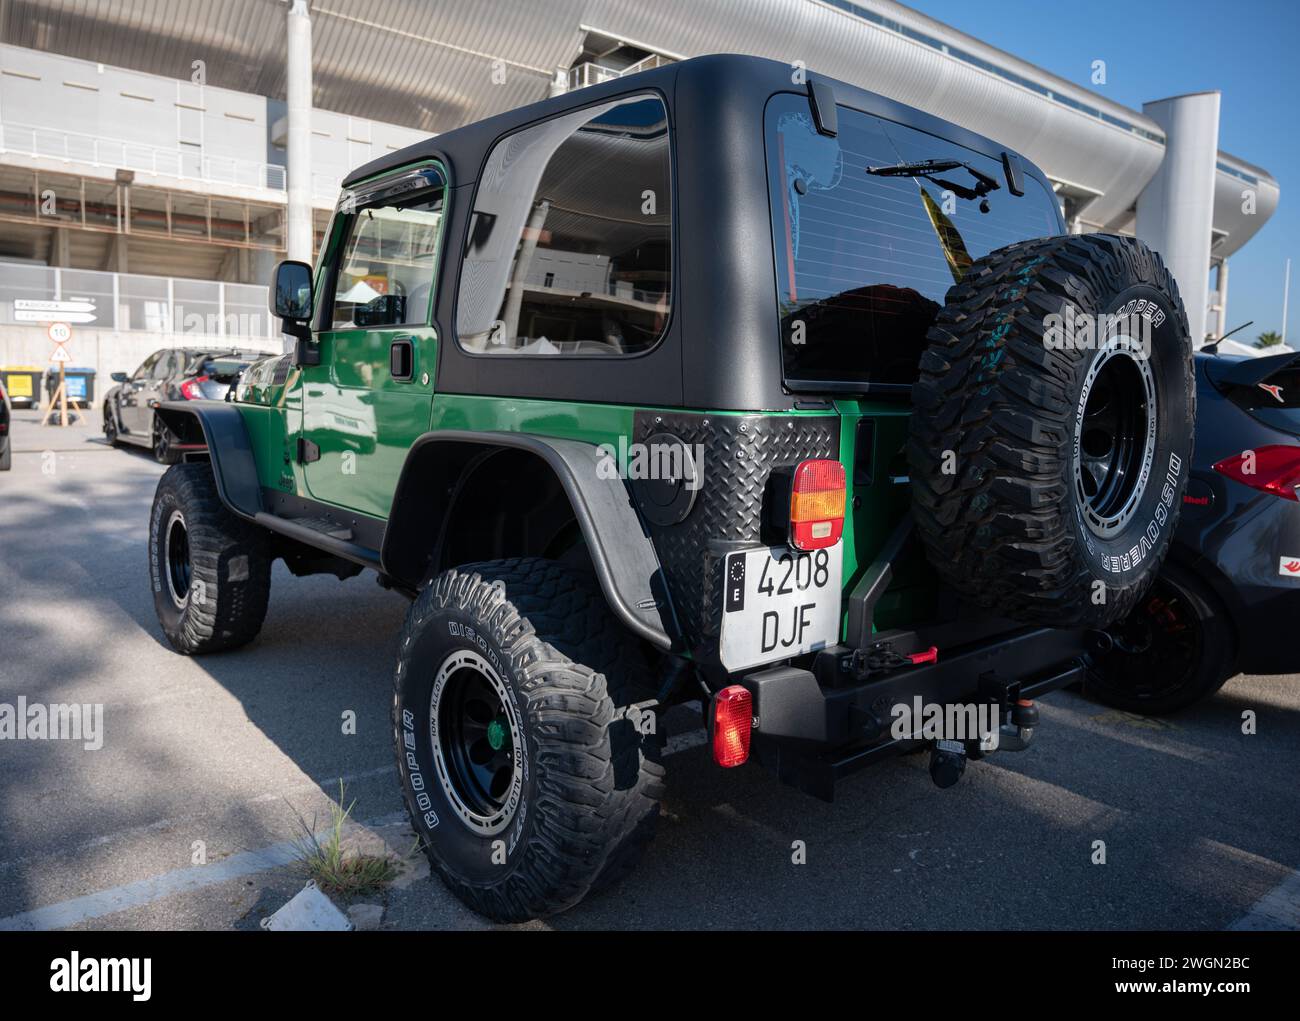 Rear view of a green Jeep Wrangler ready for adventure Stock Photo